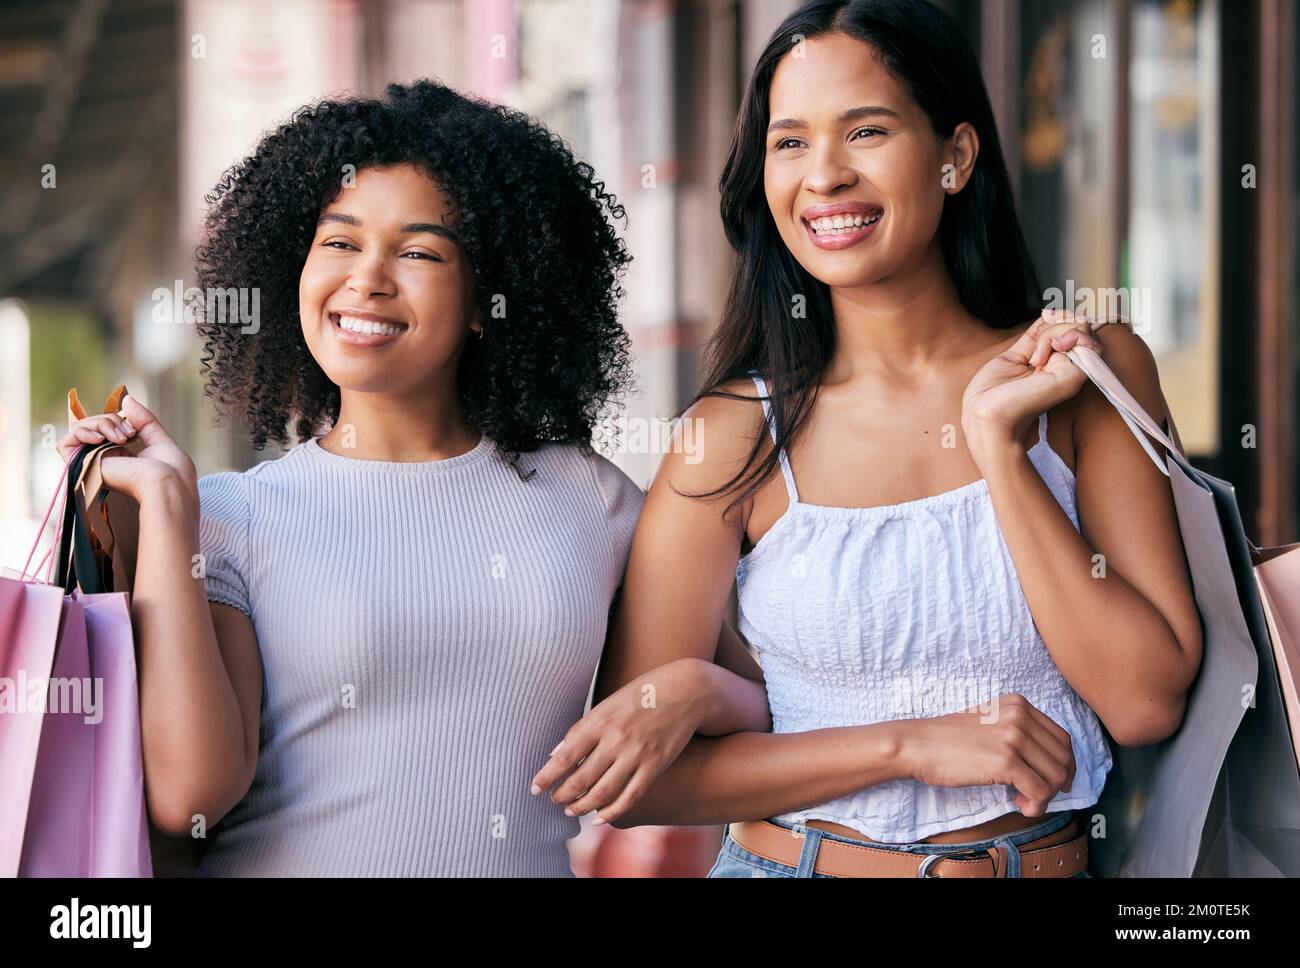 Shopping, friends and customer women with shopping bags in the city about retail sales and discount. Urban shopping mall, friendship and females happy Stock Photo